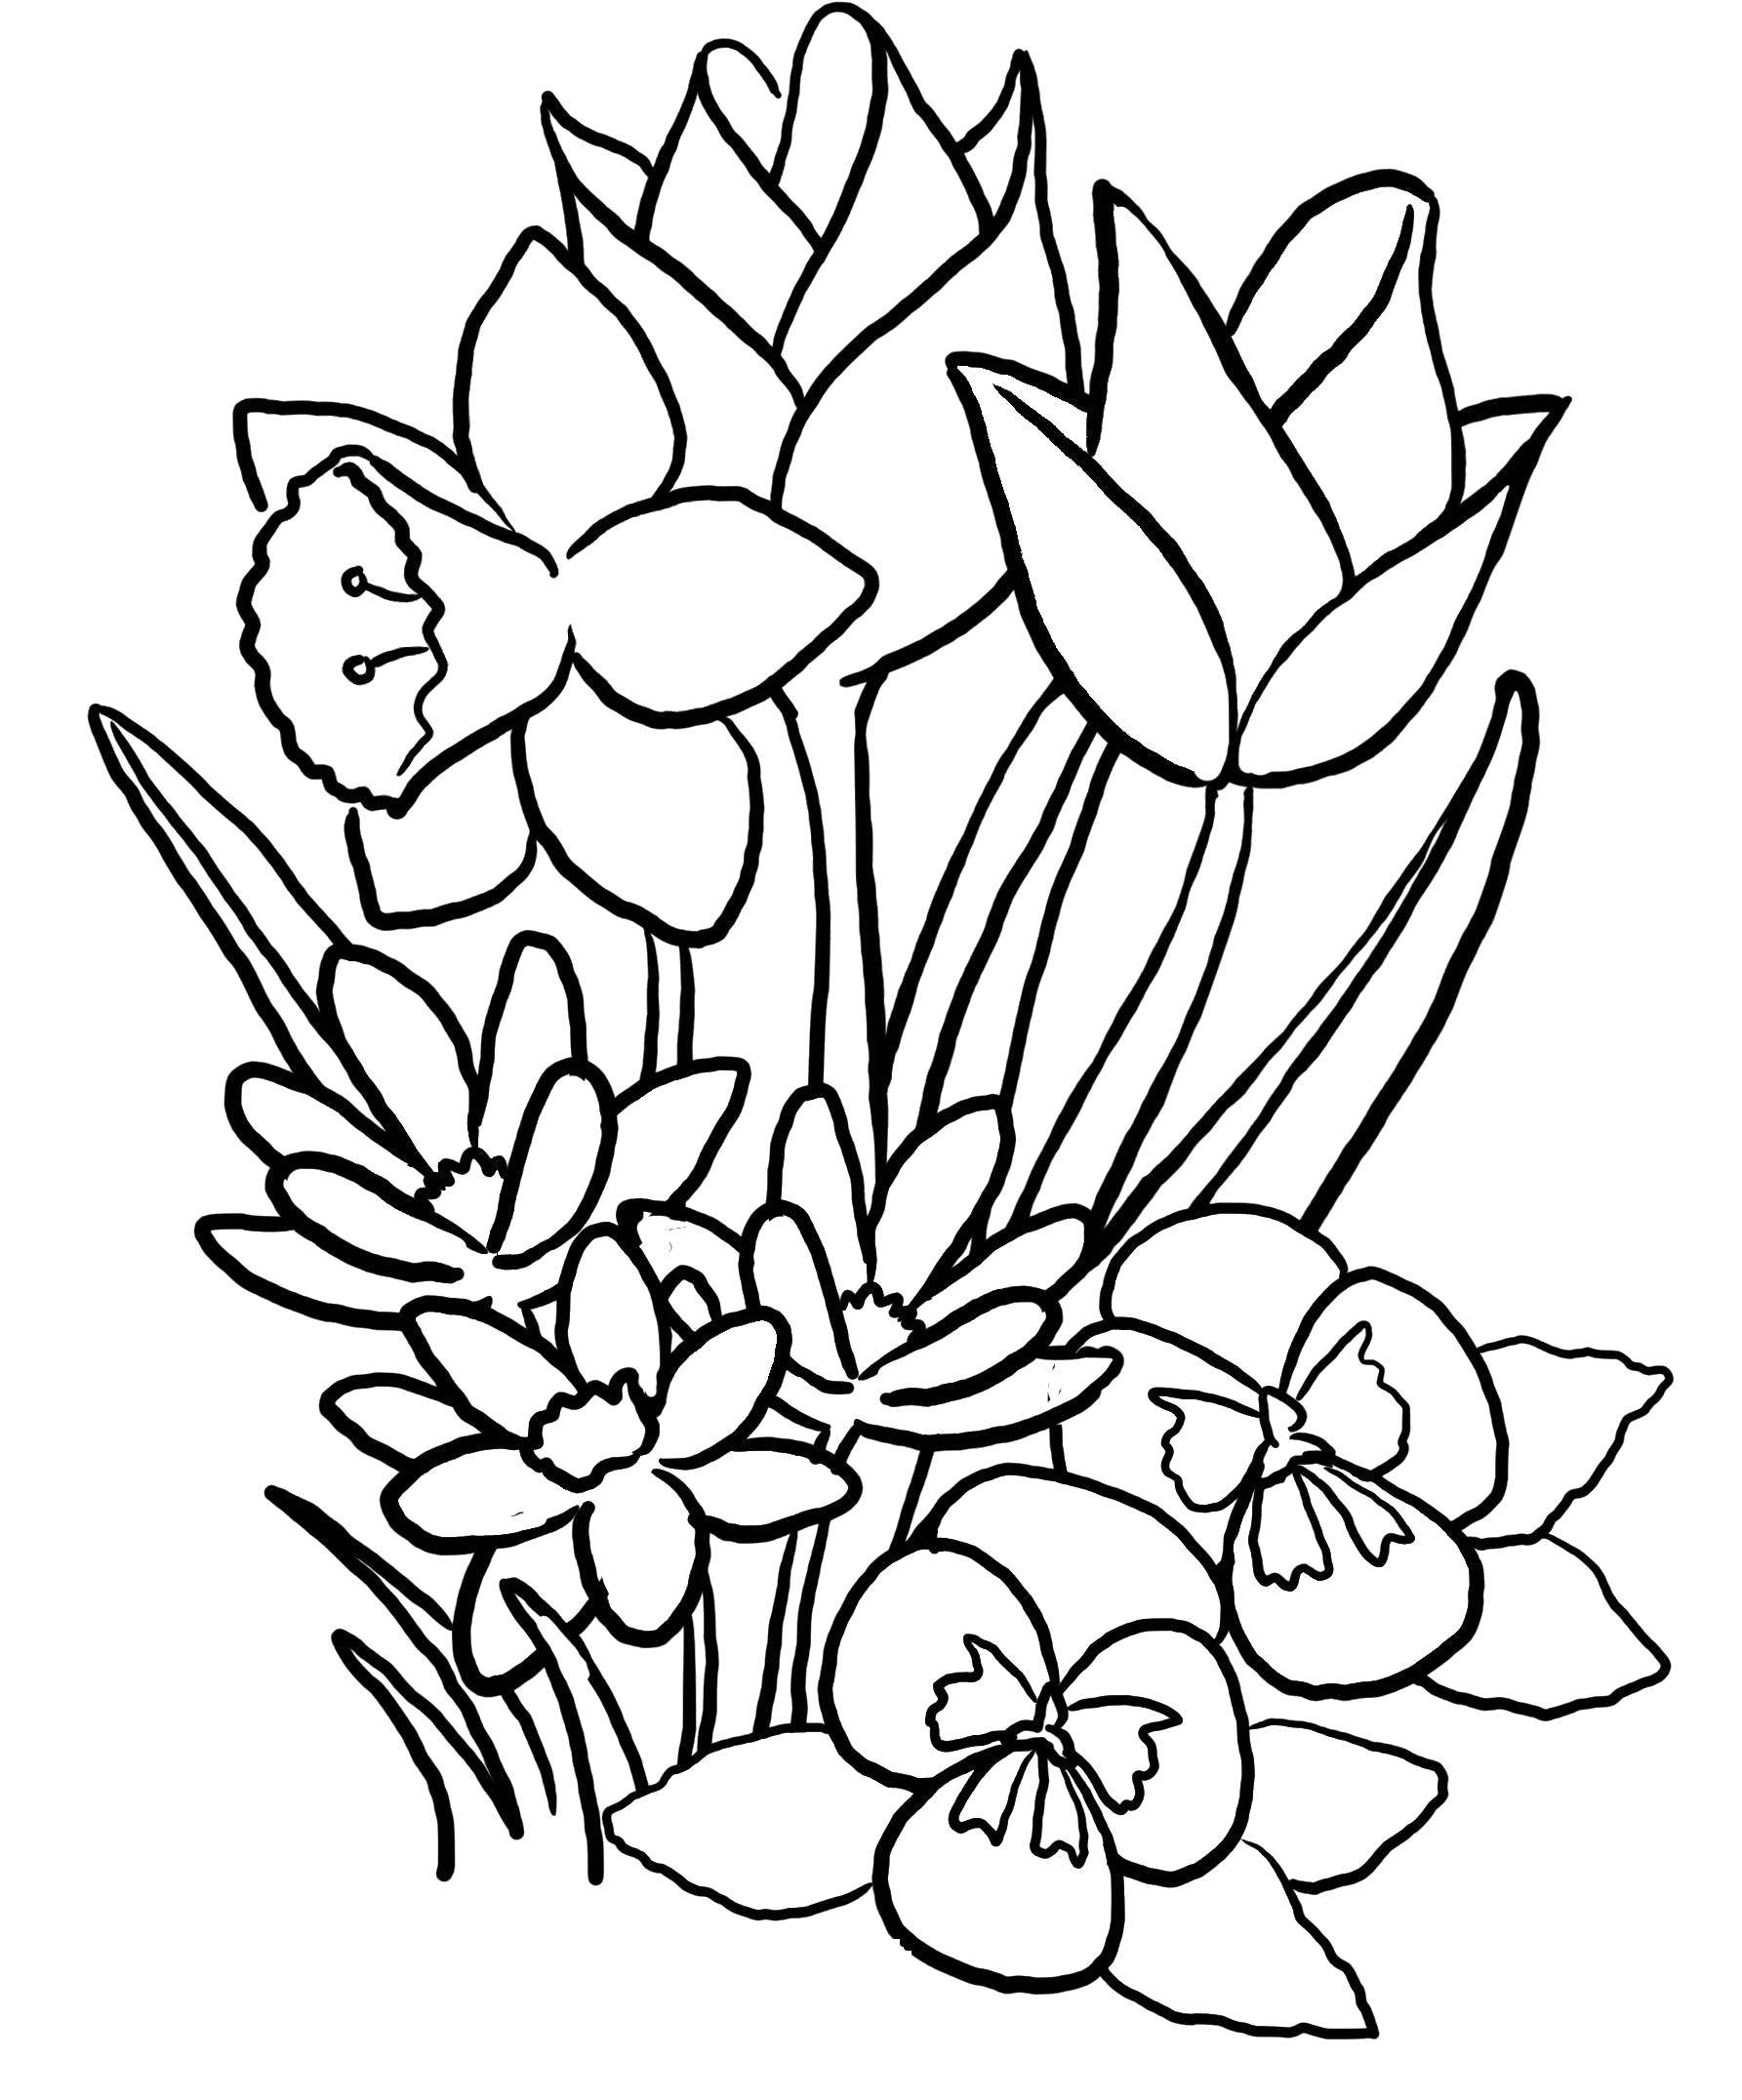 Coloring A variety of flowers. Category flowers. Tags:  Flowers, bouquet.